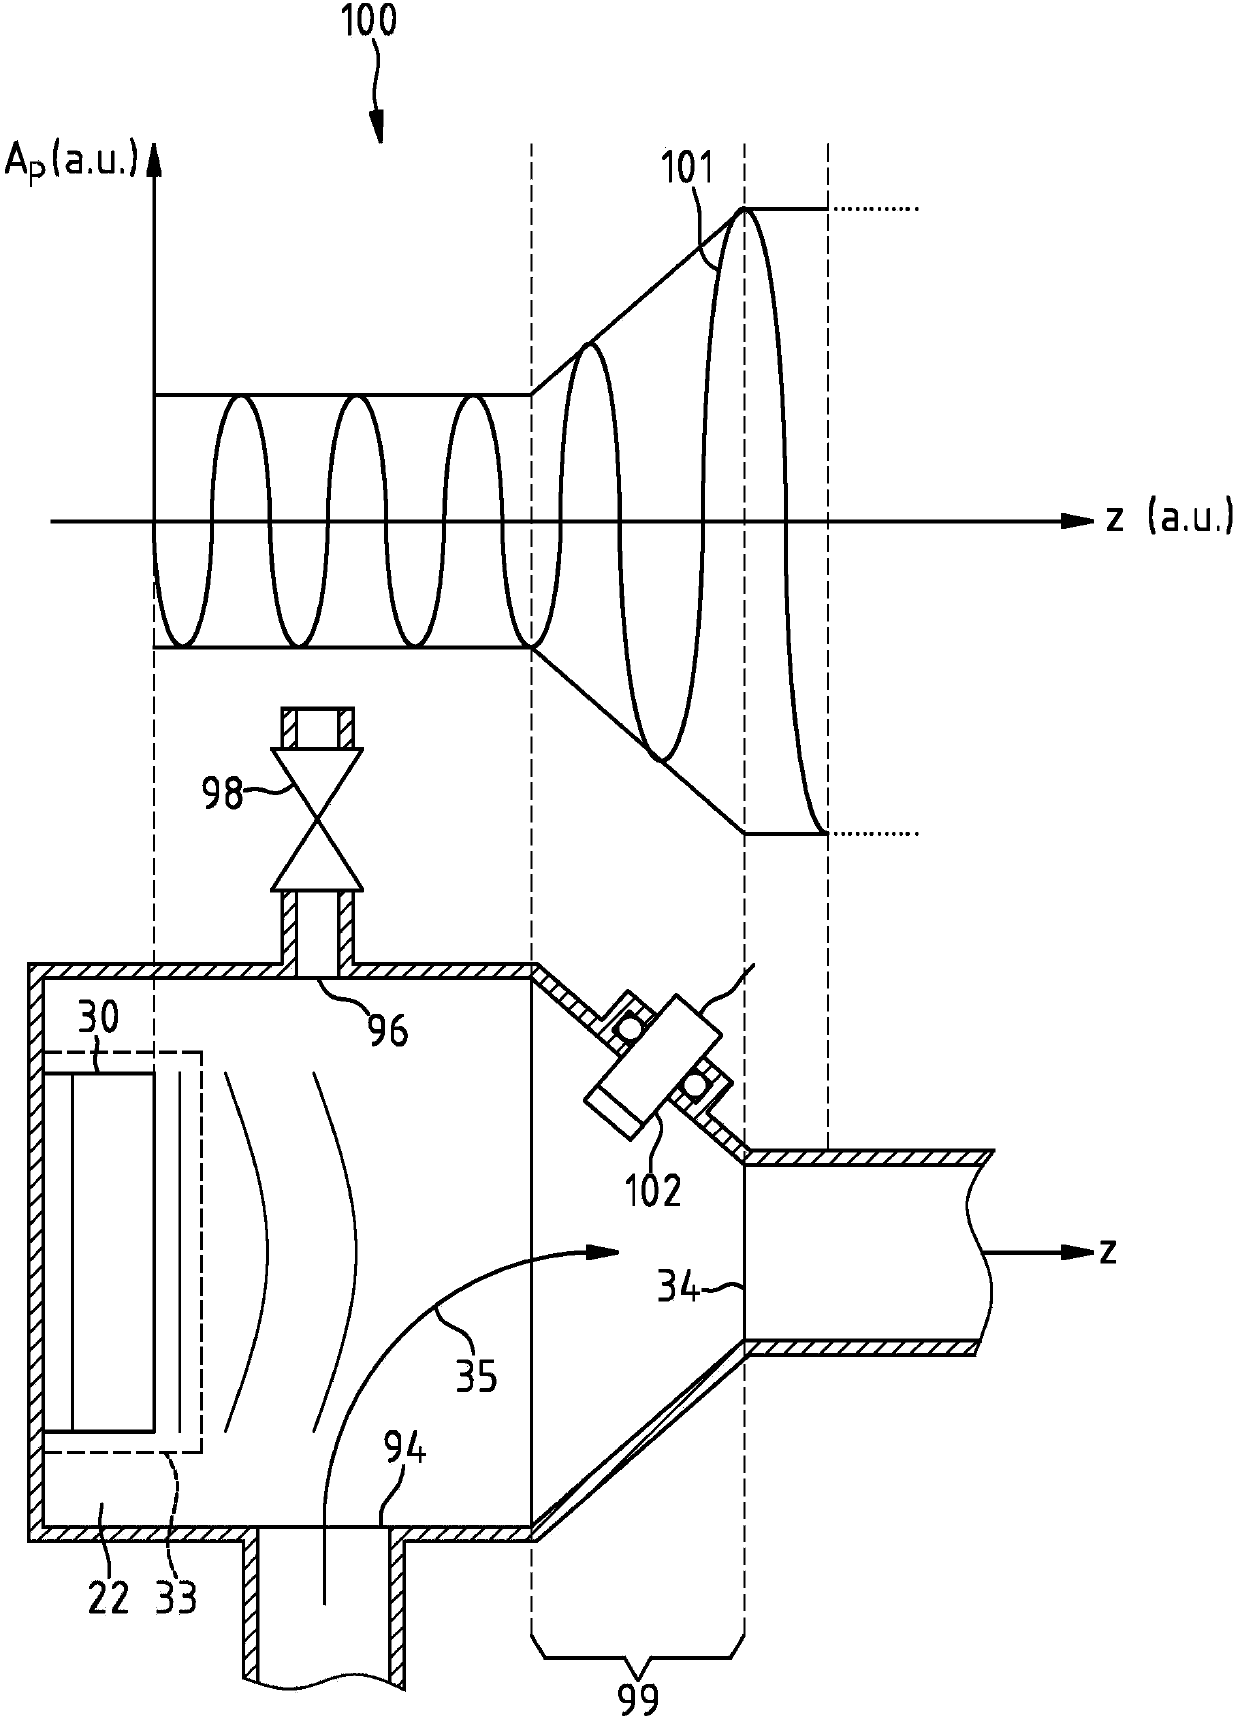 Device for generating a pulsating fluid jet subjected to pressure